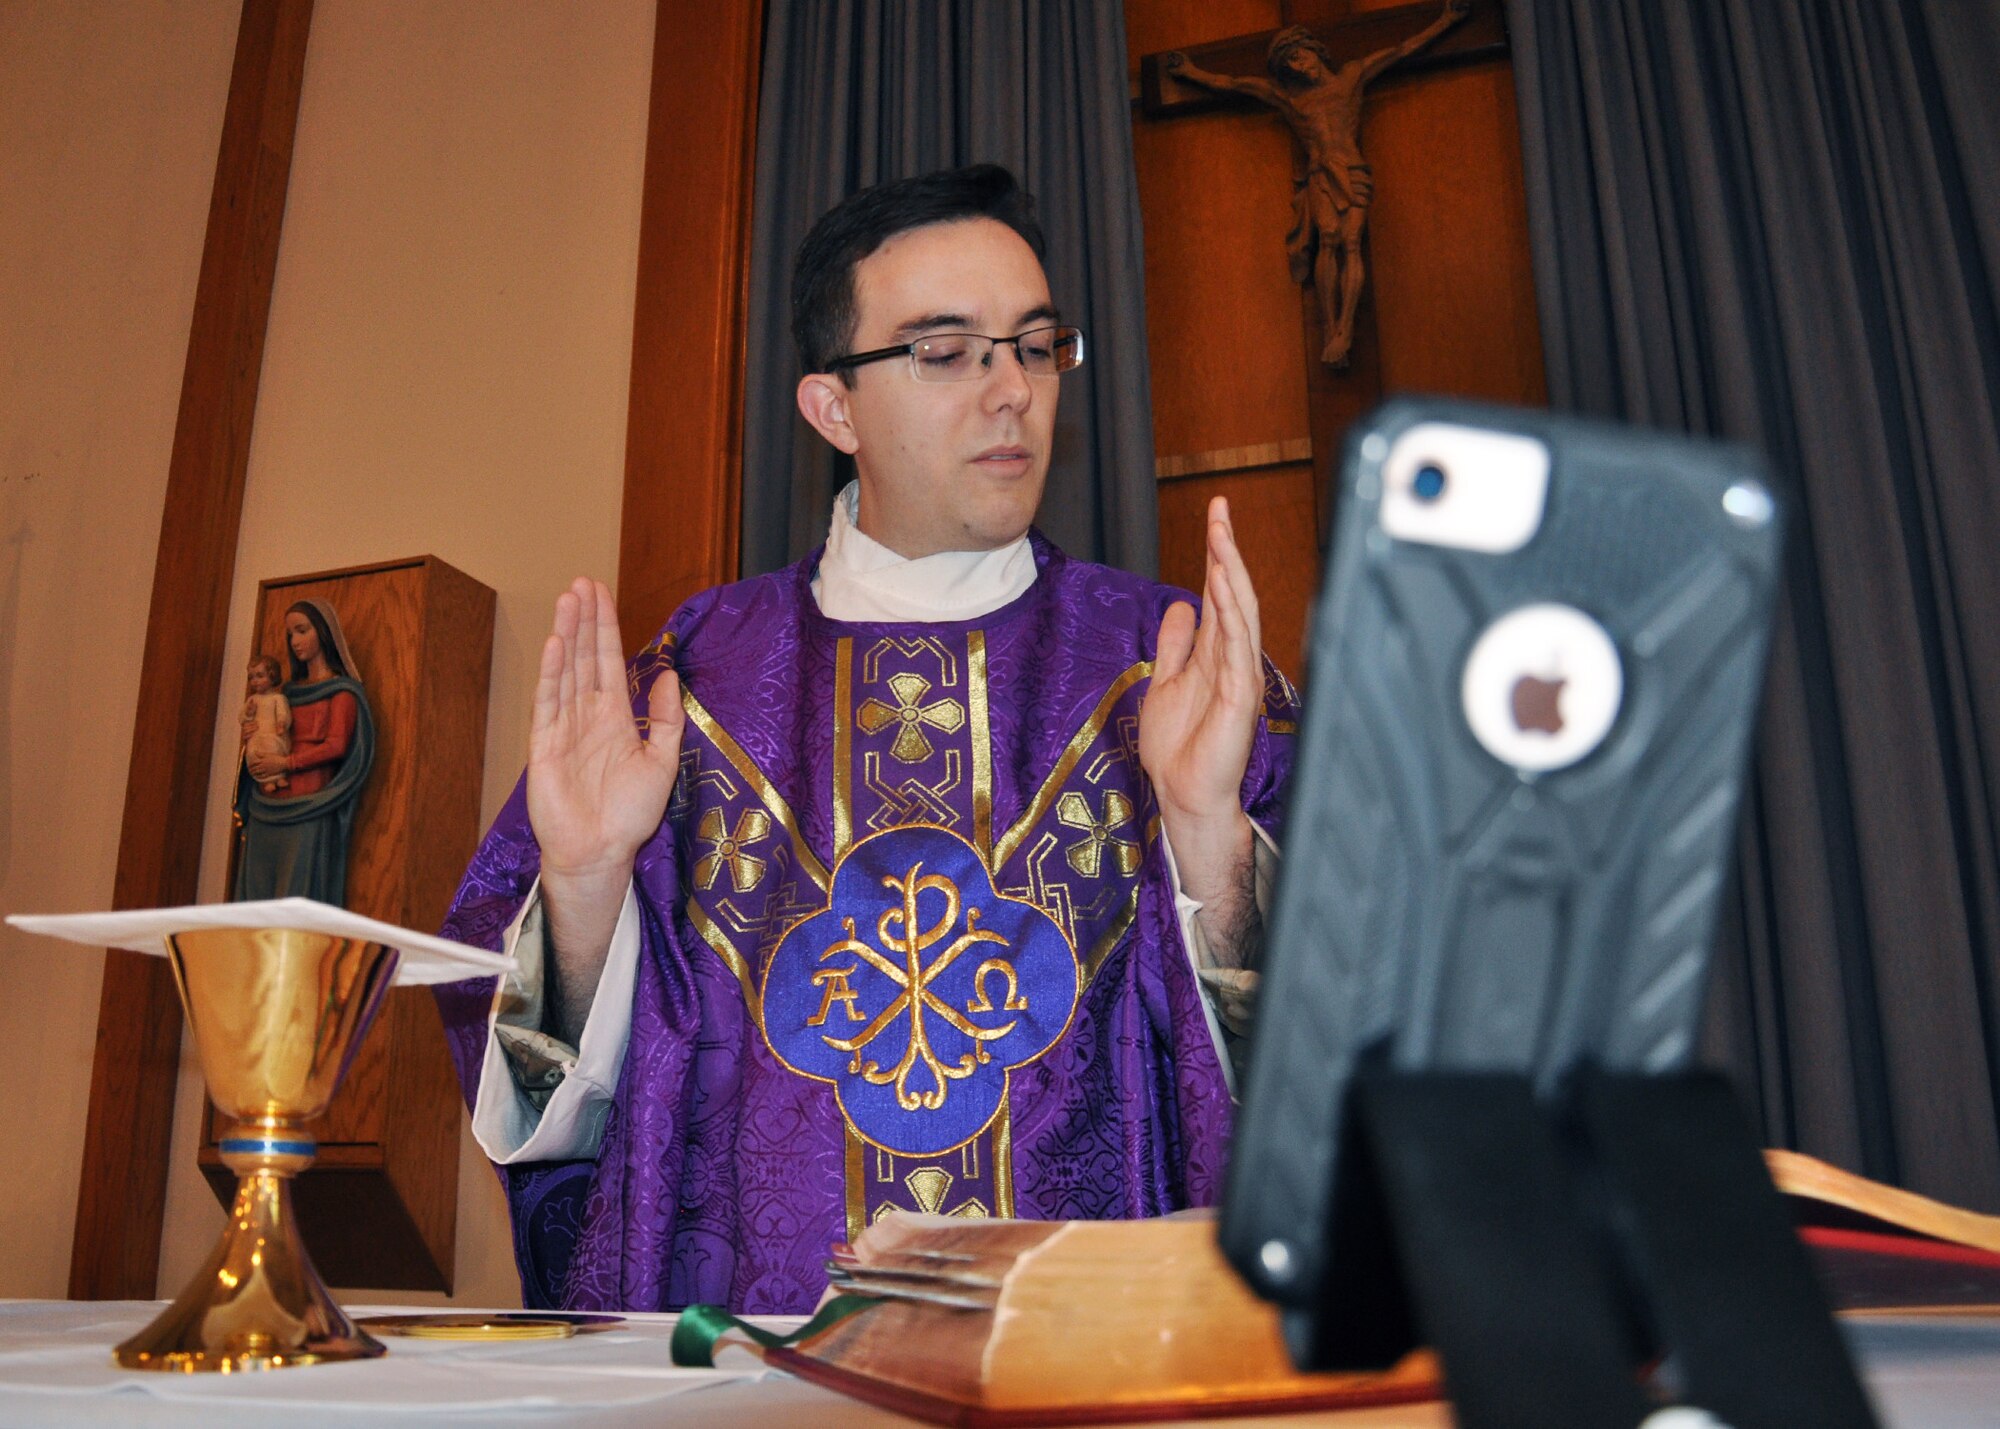 priest at alter preparing the gifts offered before communion during a virtual mass with a cell phone in foreground.